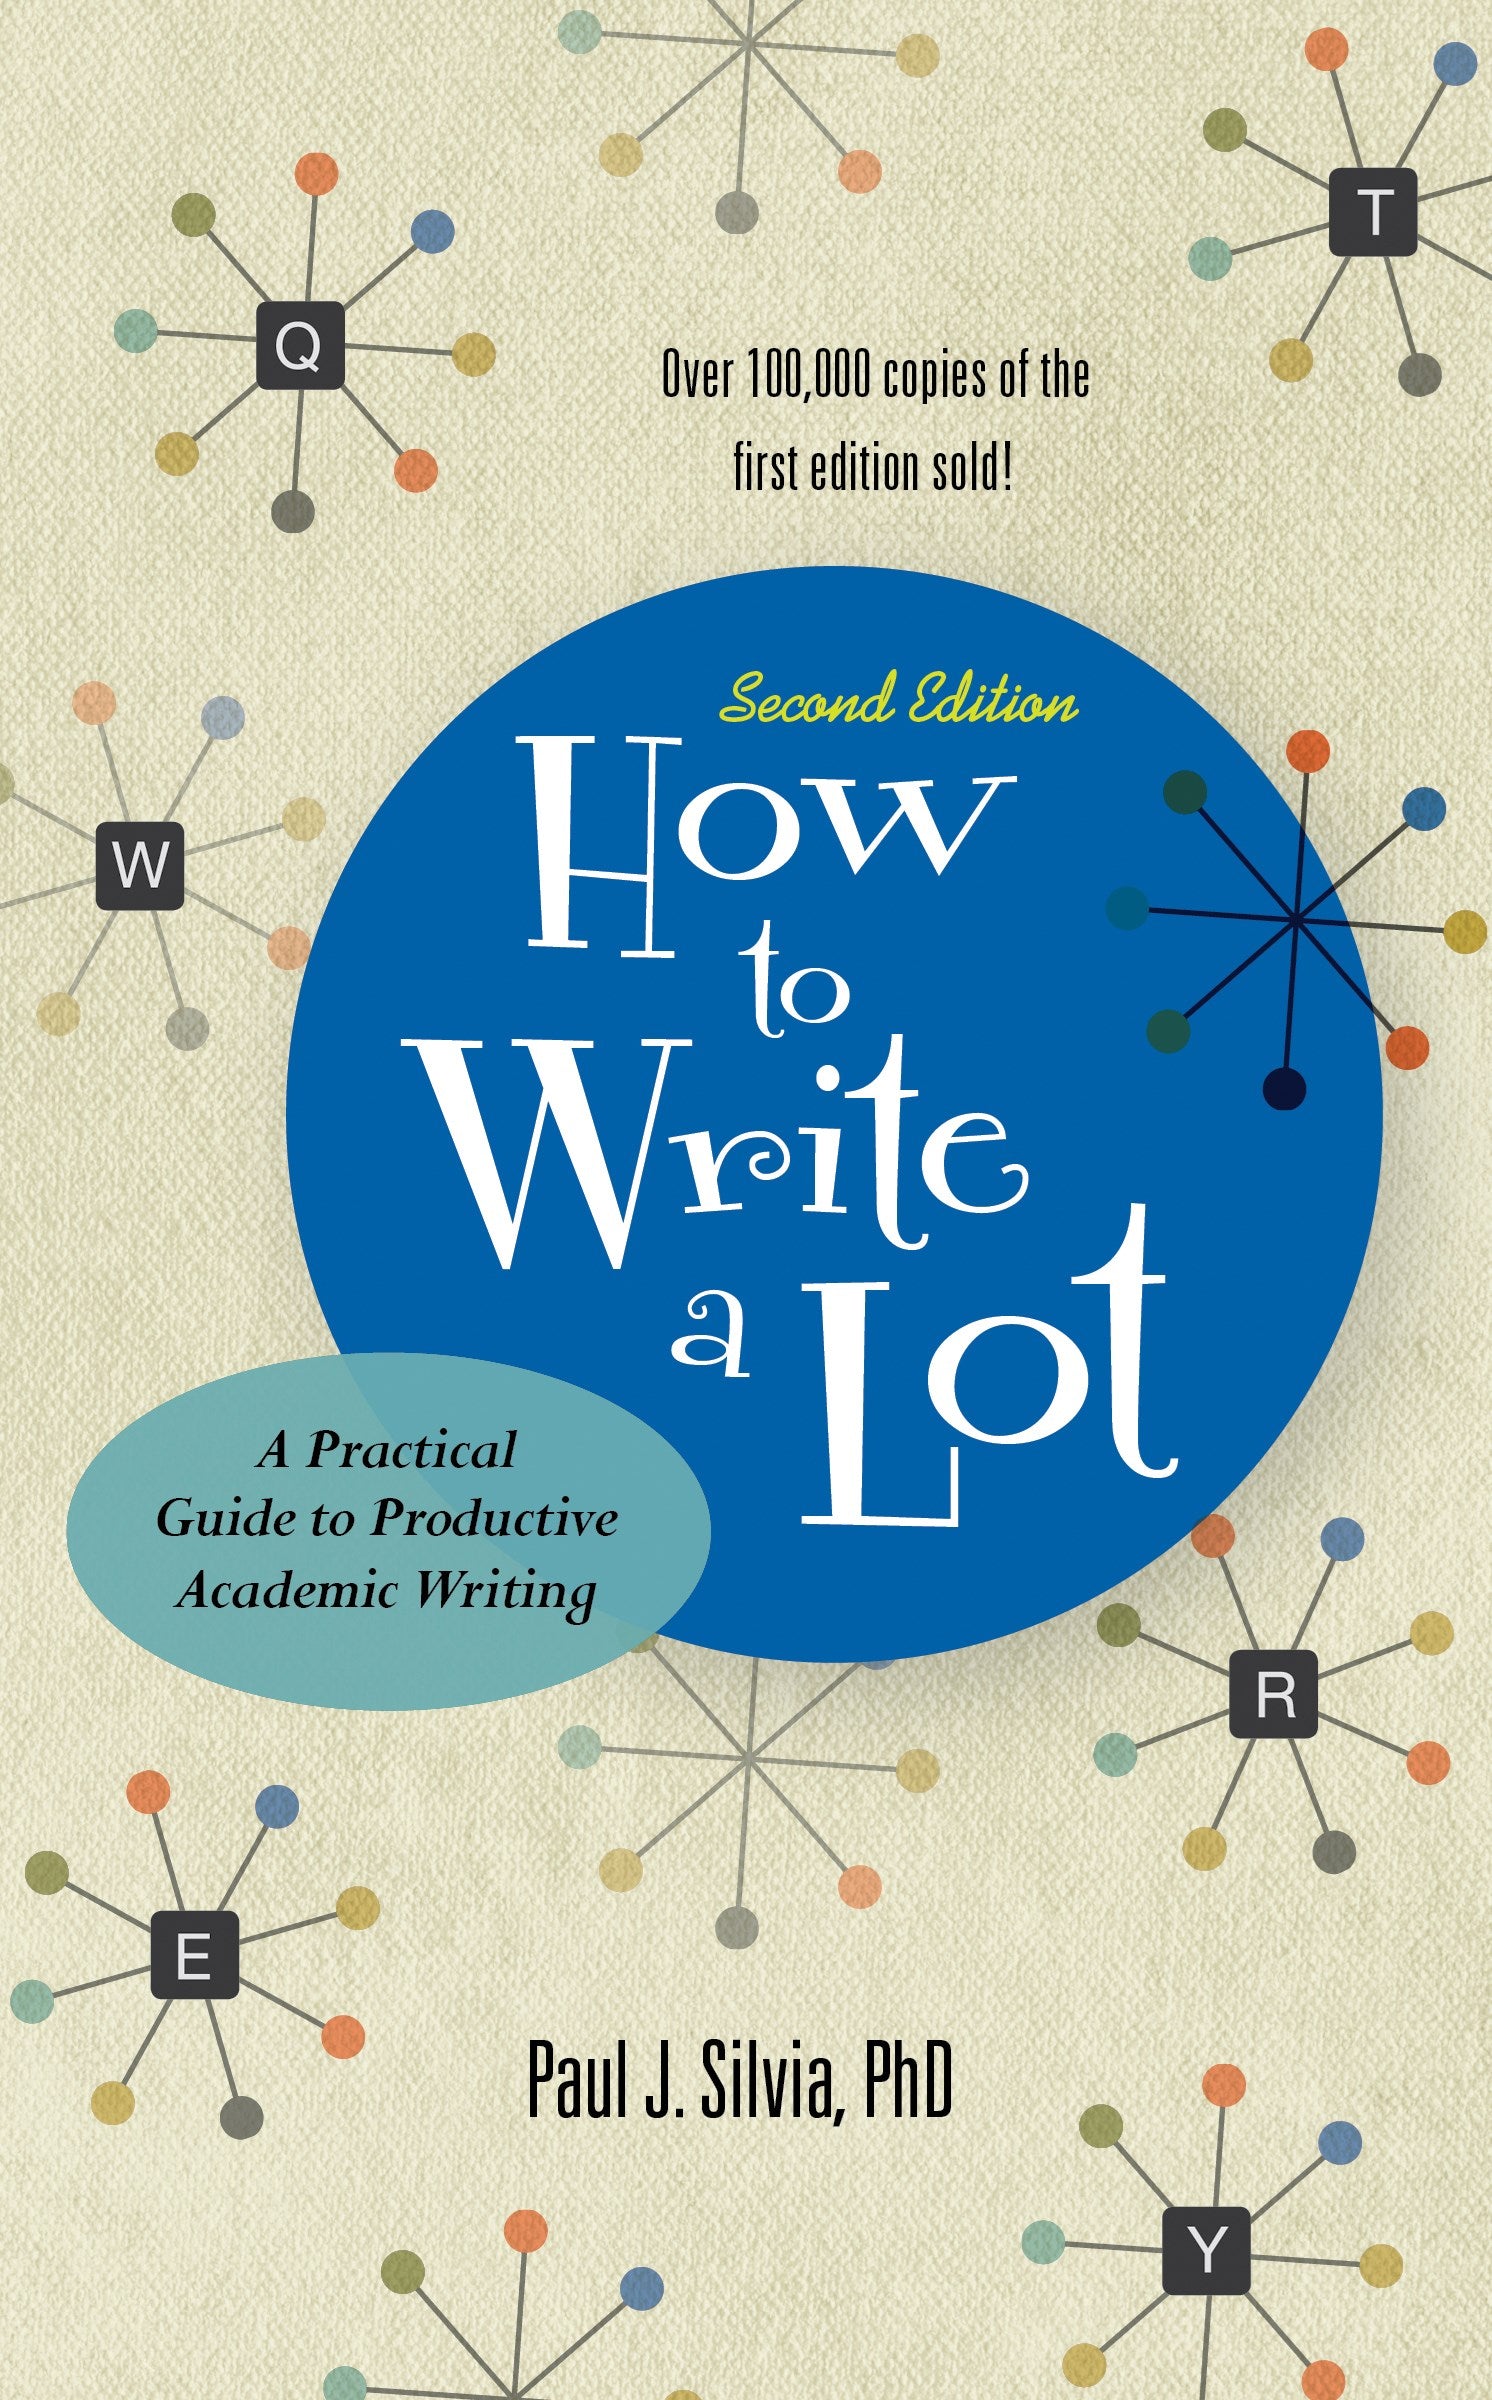 How to Write a Lot: A Practical Guide to Productive Academic Writing (2nd Edition)